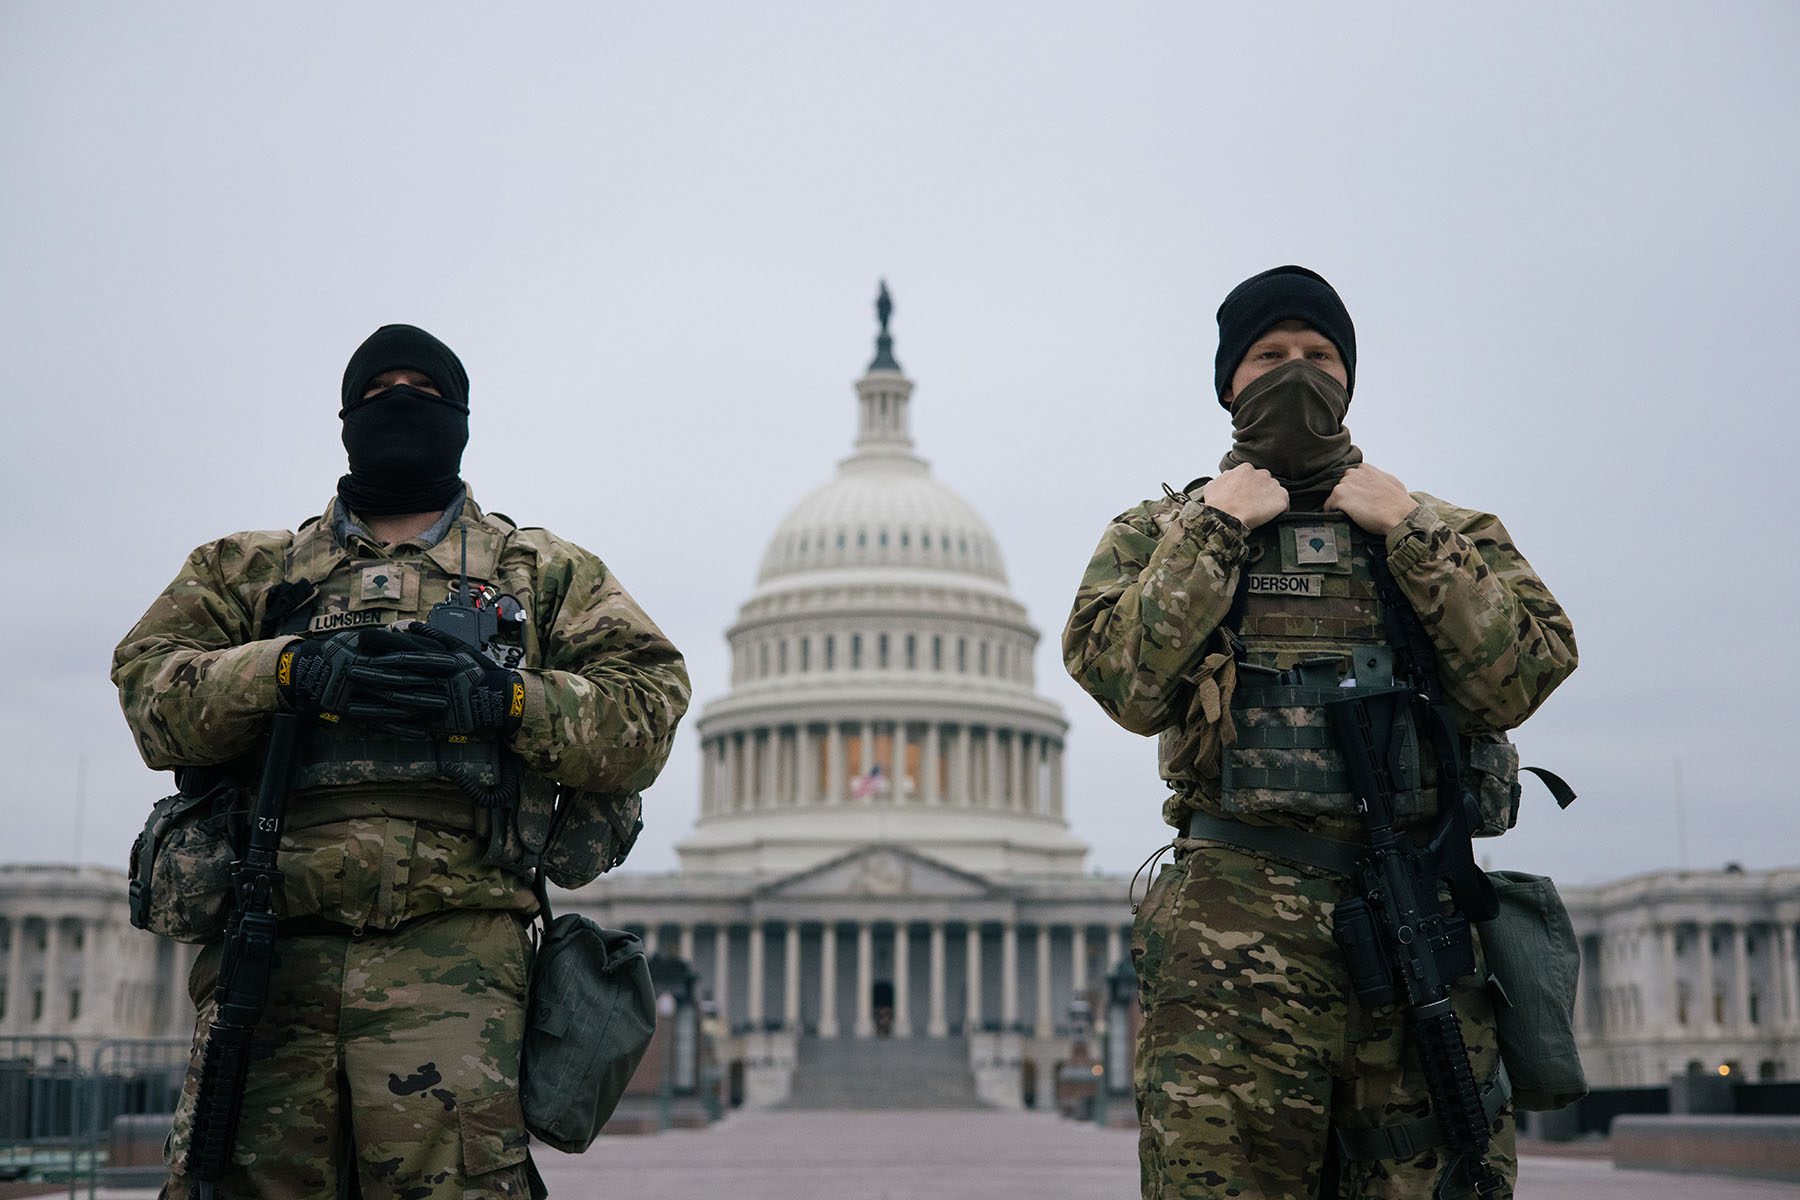 Michigan National Guard soldiers stand guard in front of the U.S. Capitol